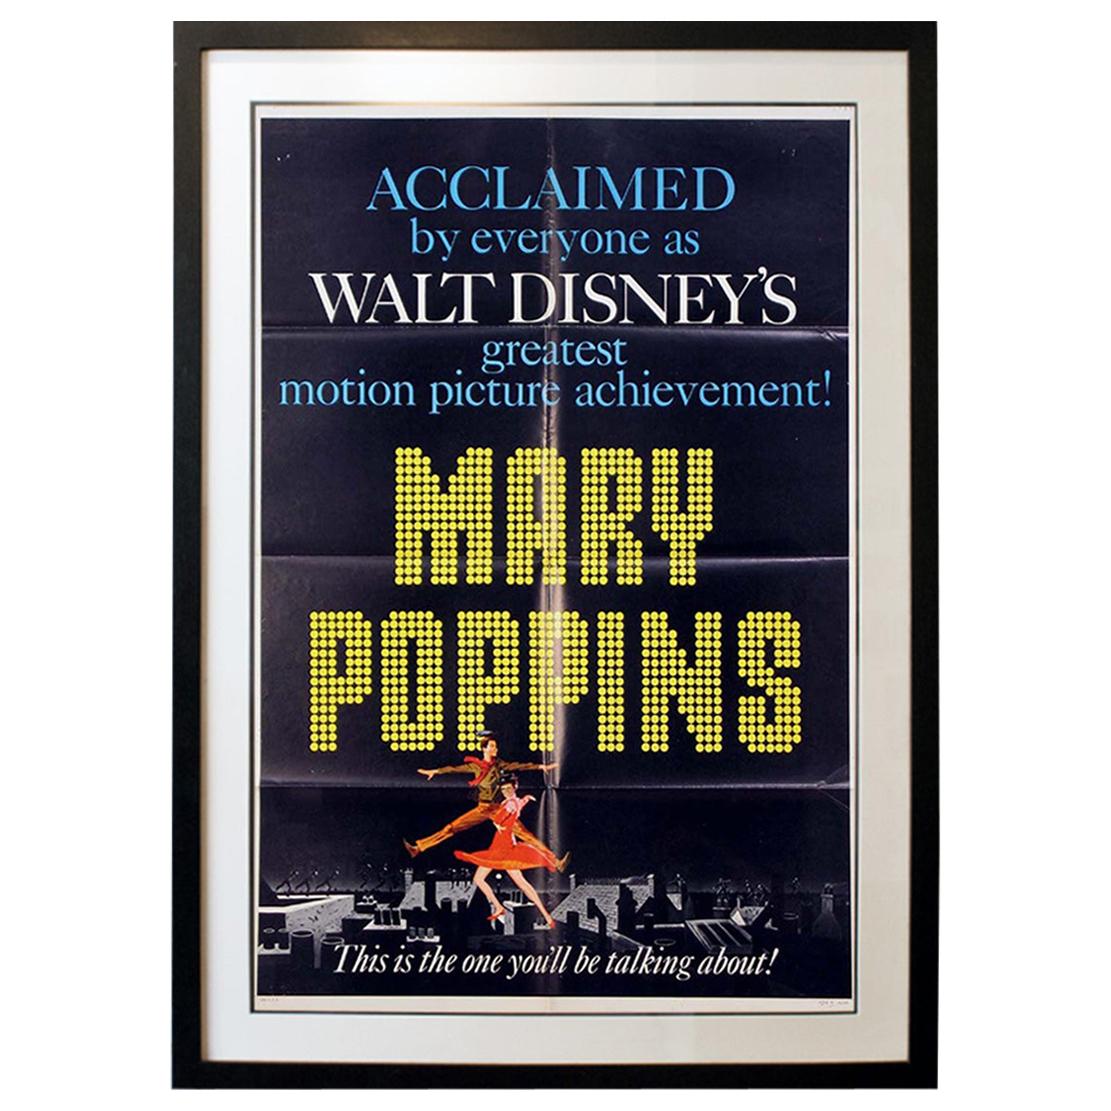 "Mary Poppins" '1964' Poster For Sale